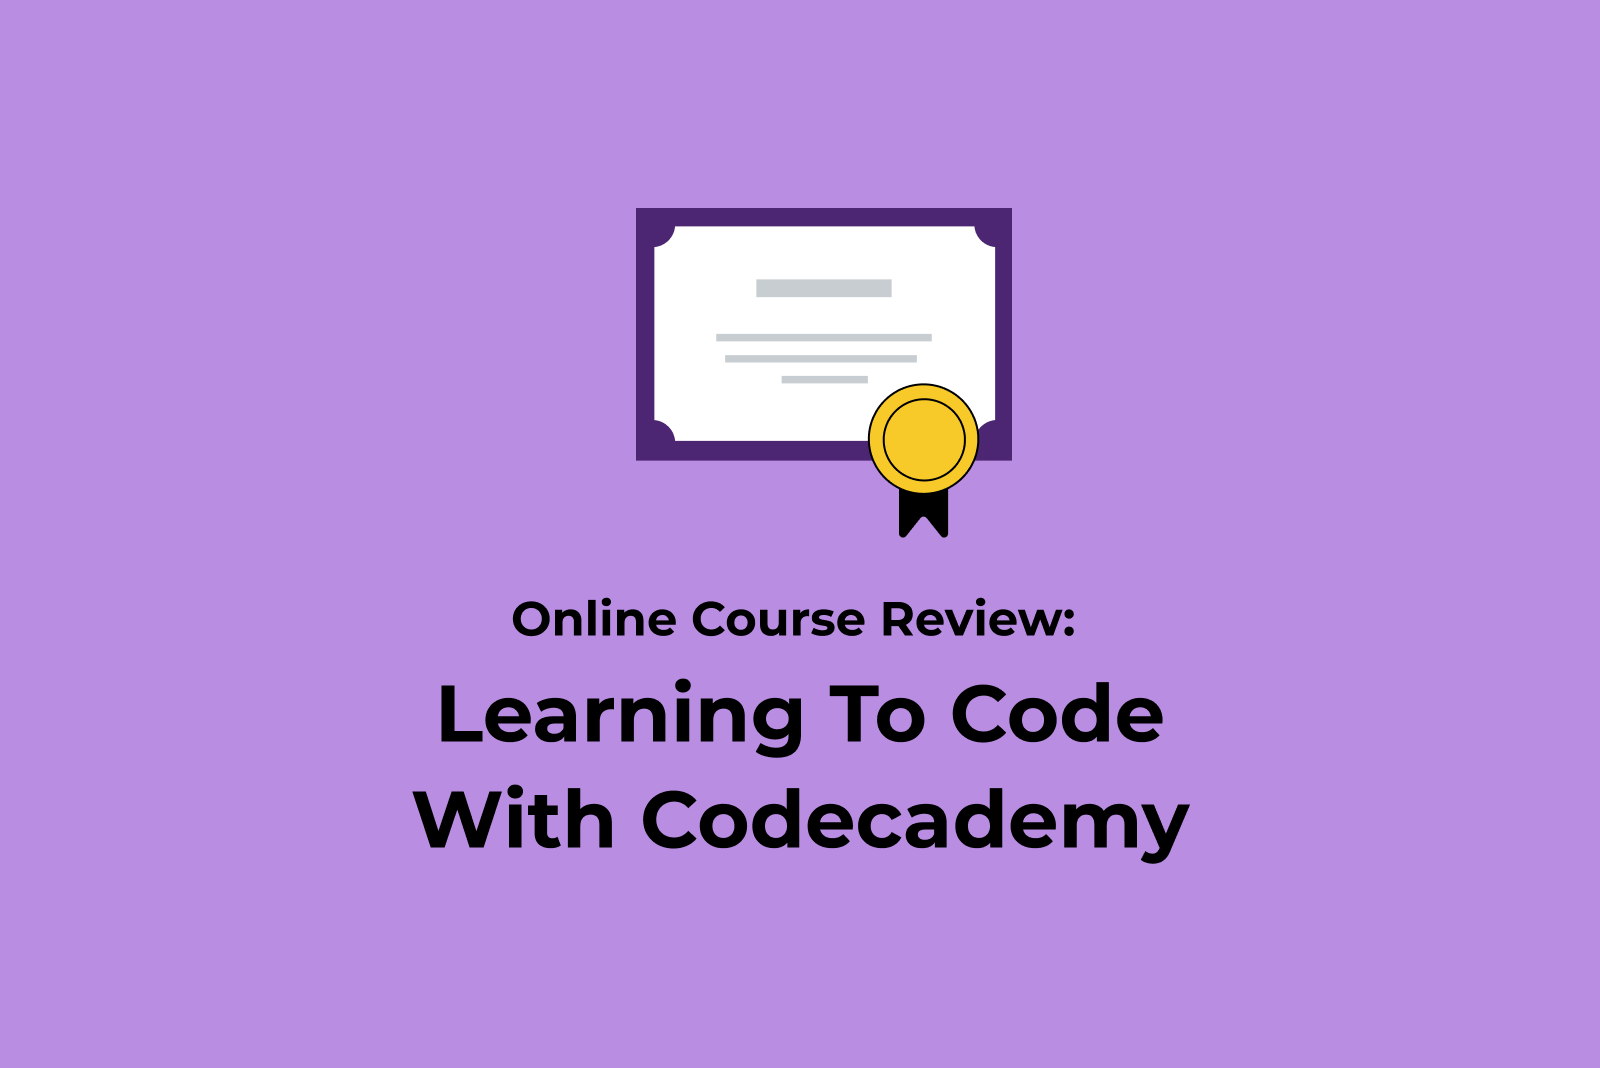 Online Course Review: Learning to Code with Codecademy